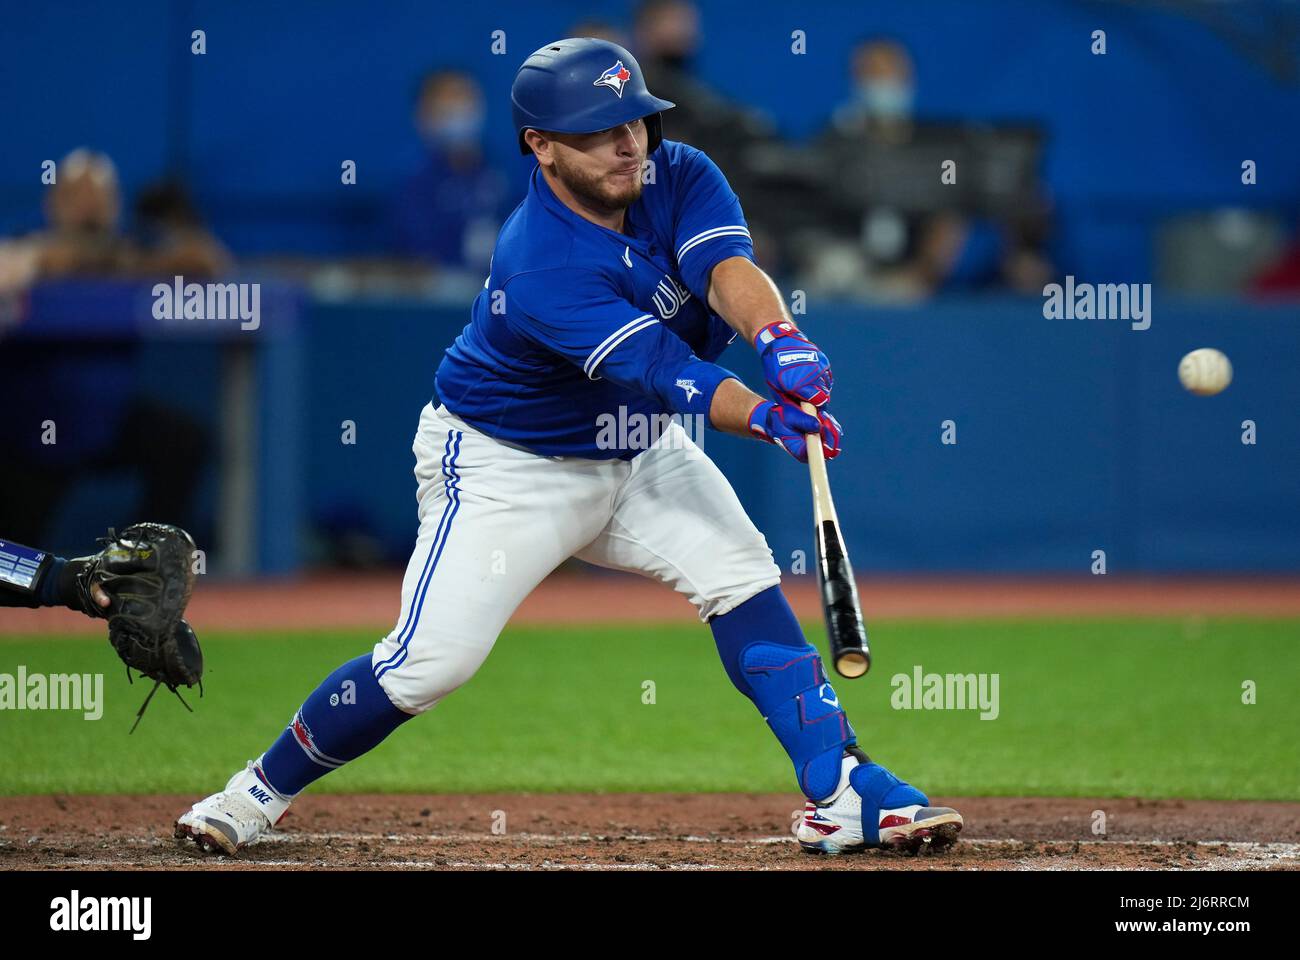 May 3, 2022, TORONTO, ON, CANADA: Toronto Blue Jays catcher Alejandro Kirk  (30) hits a double against the New York Yankees during fifth inning  American League MLB baseball action in Toronto on